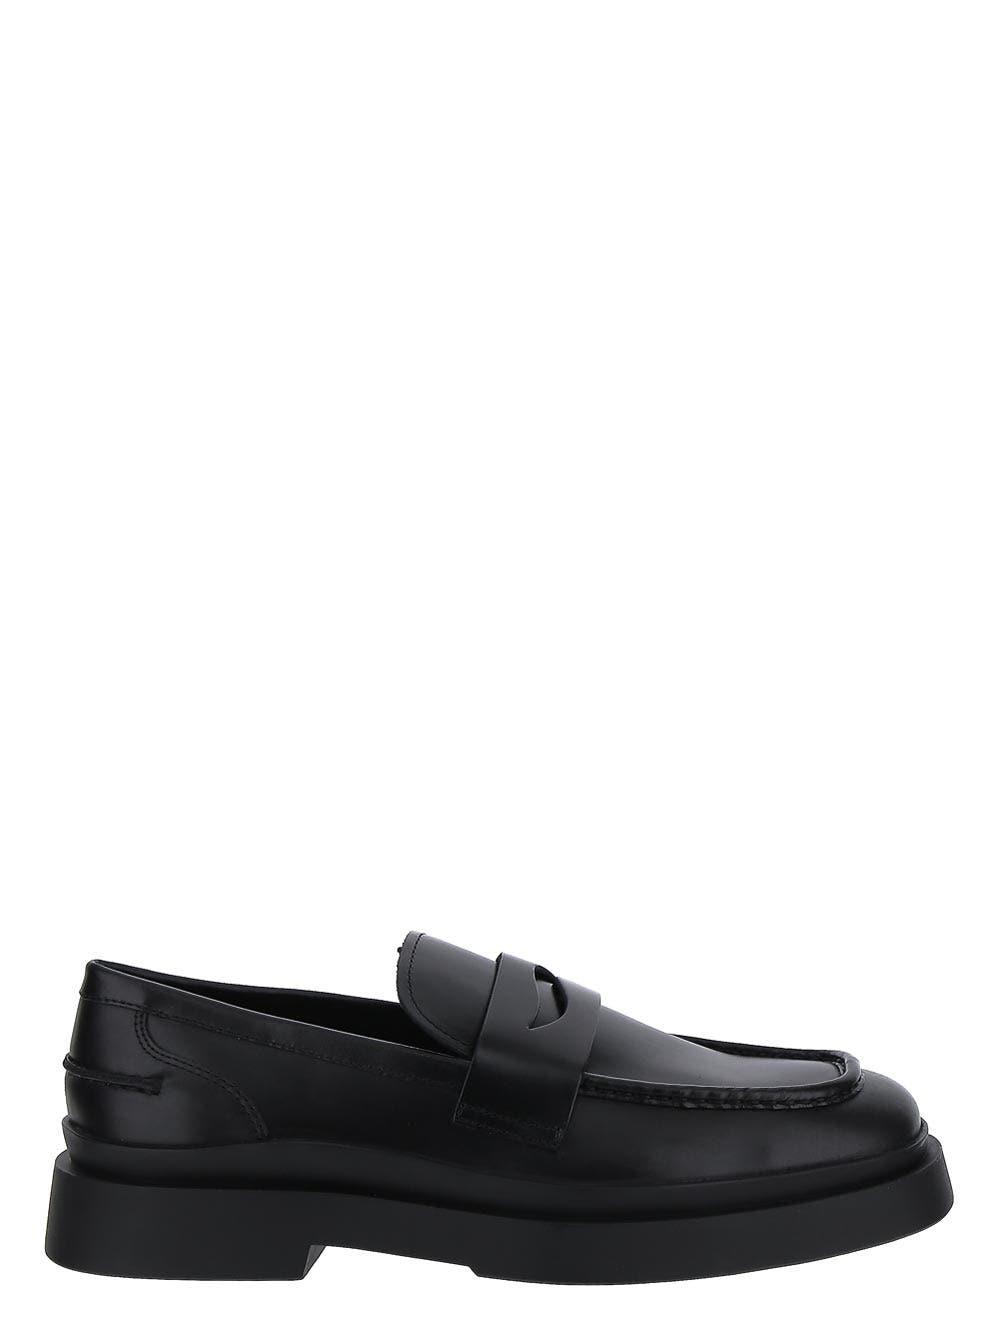 Vagabond Mike Loafers